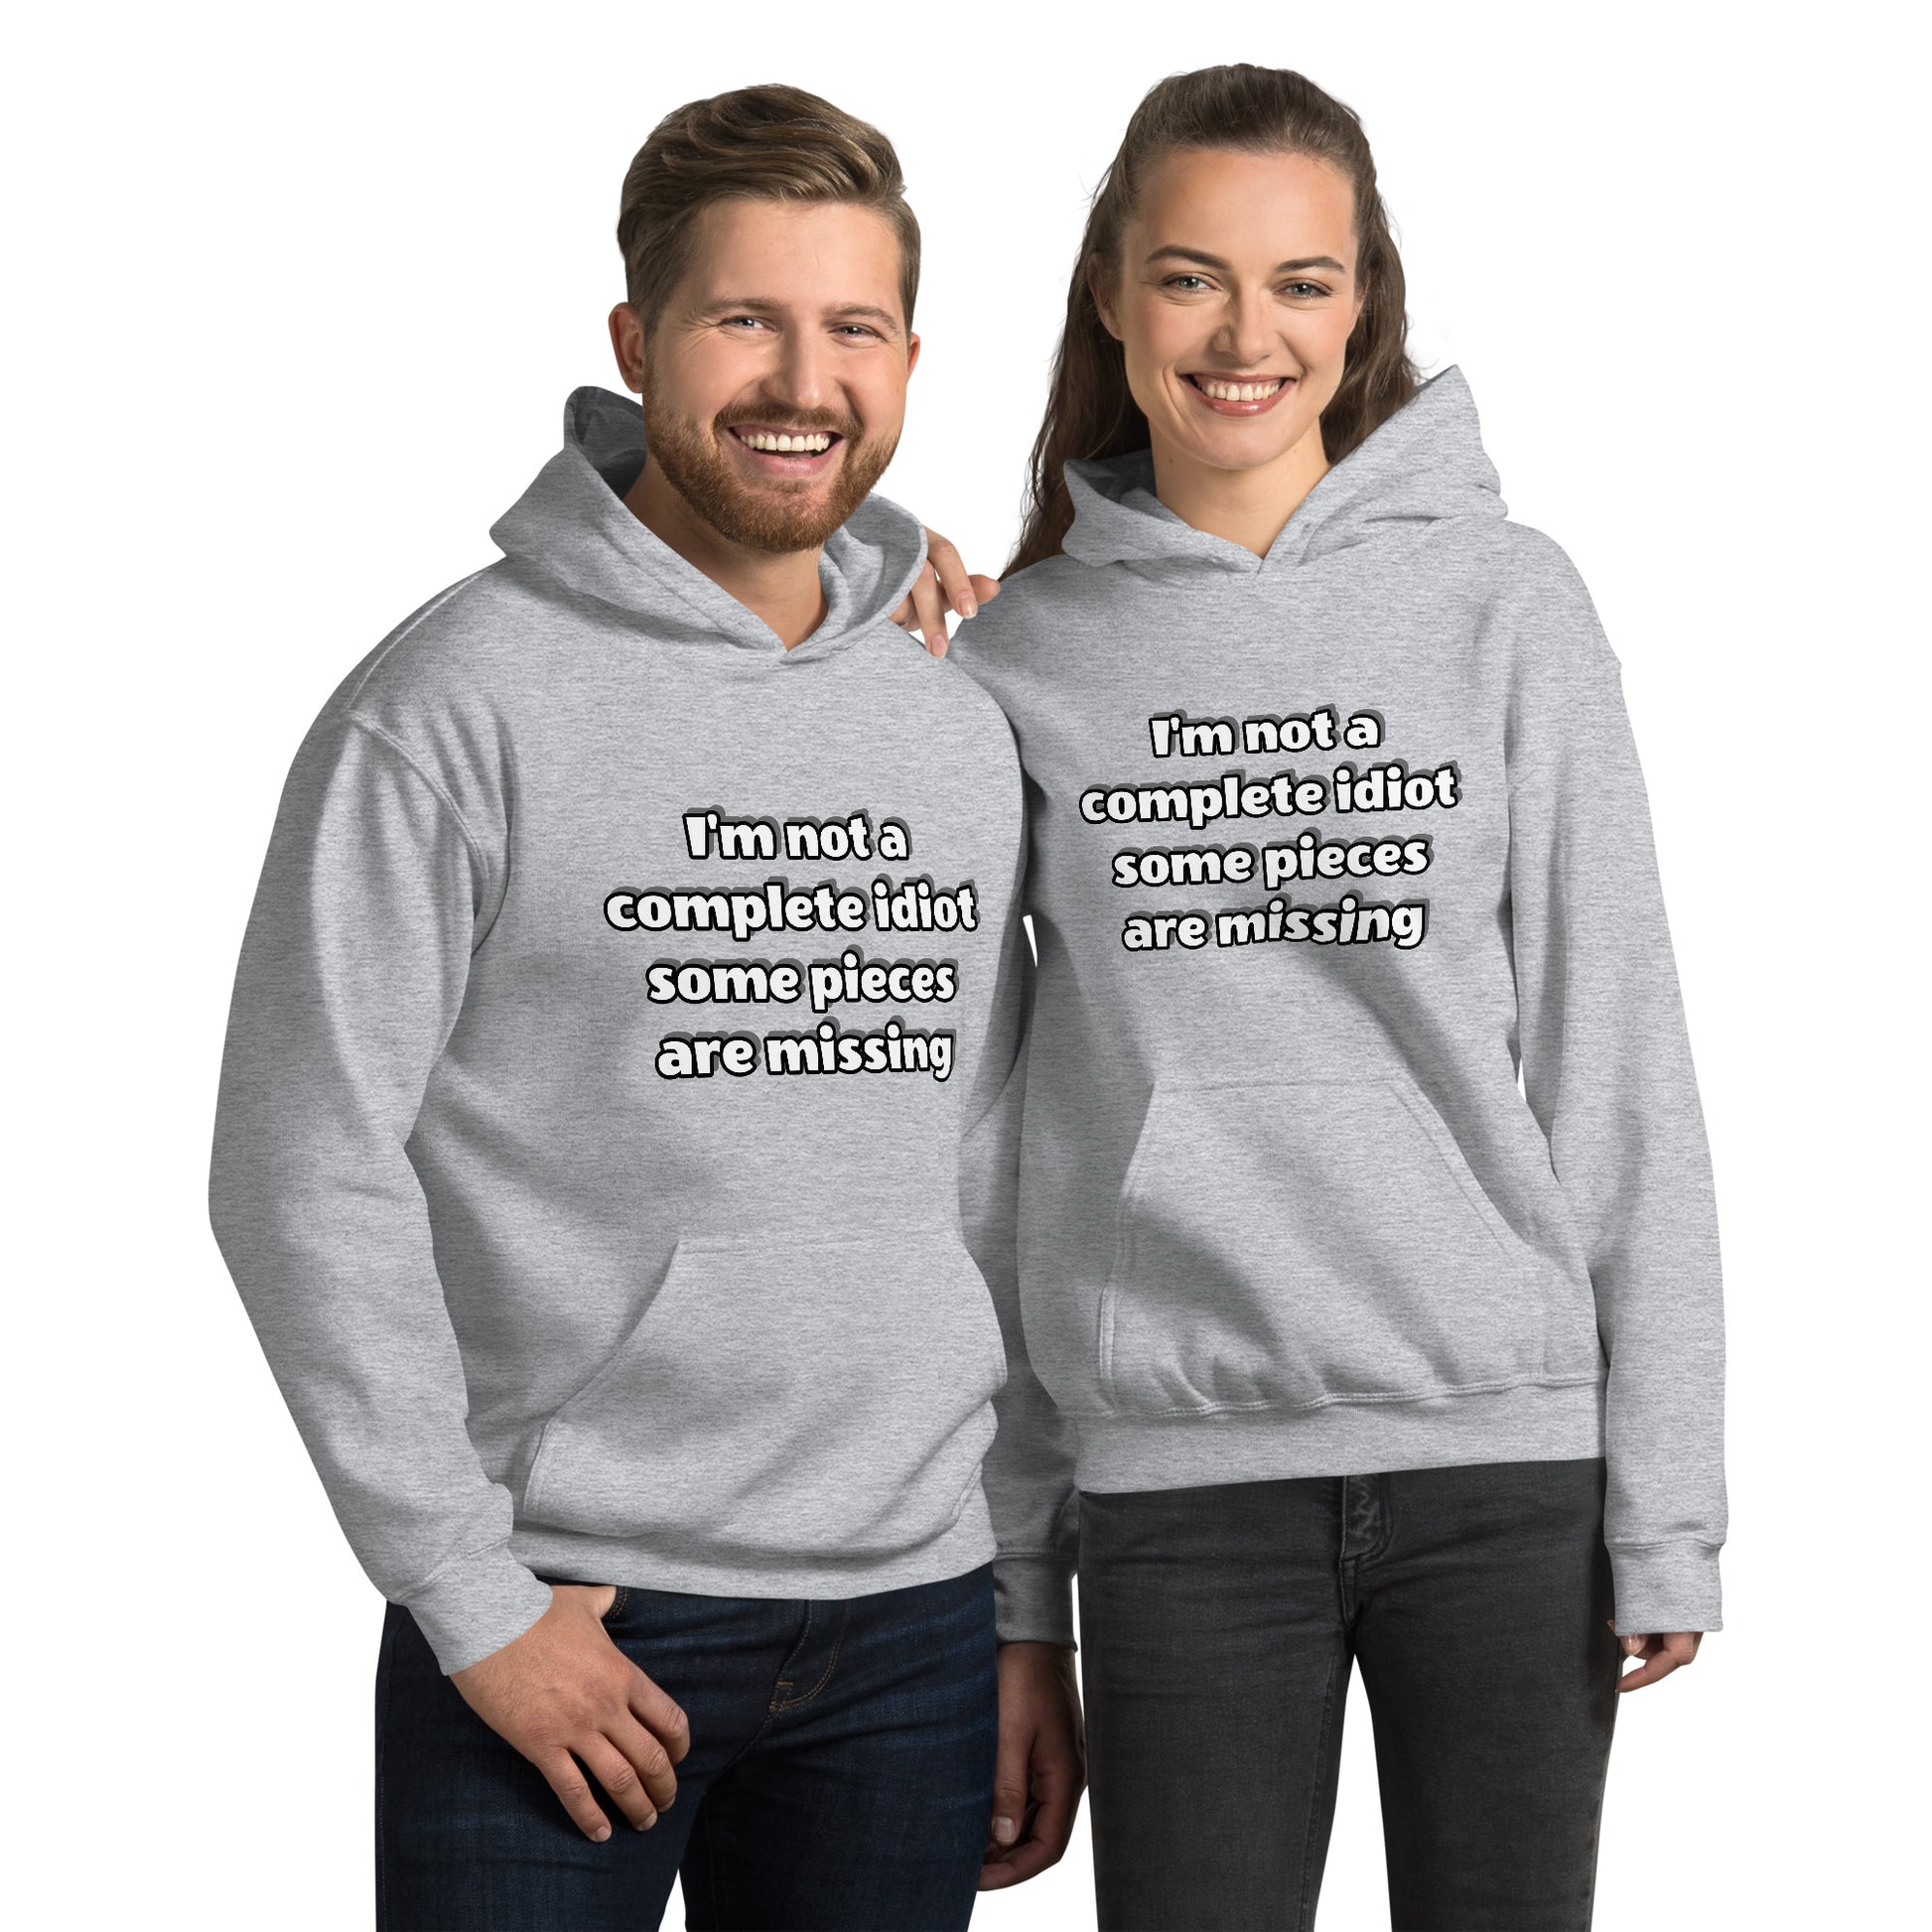 Men and women with sport grey hoodie with text “I’m not a complete idiot, some pieces are missing”